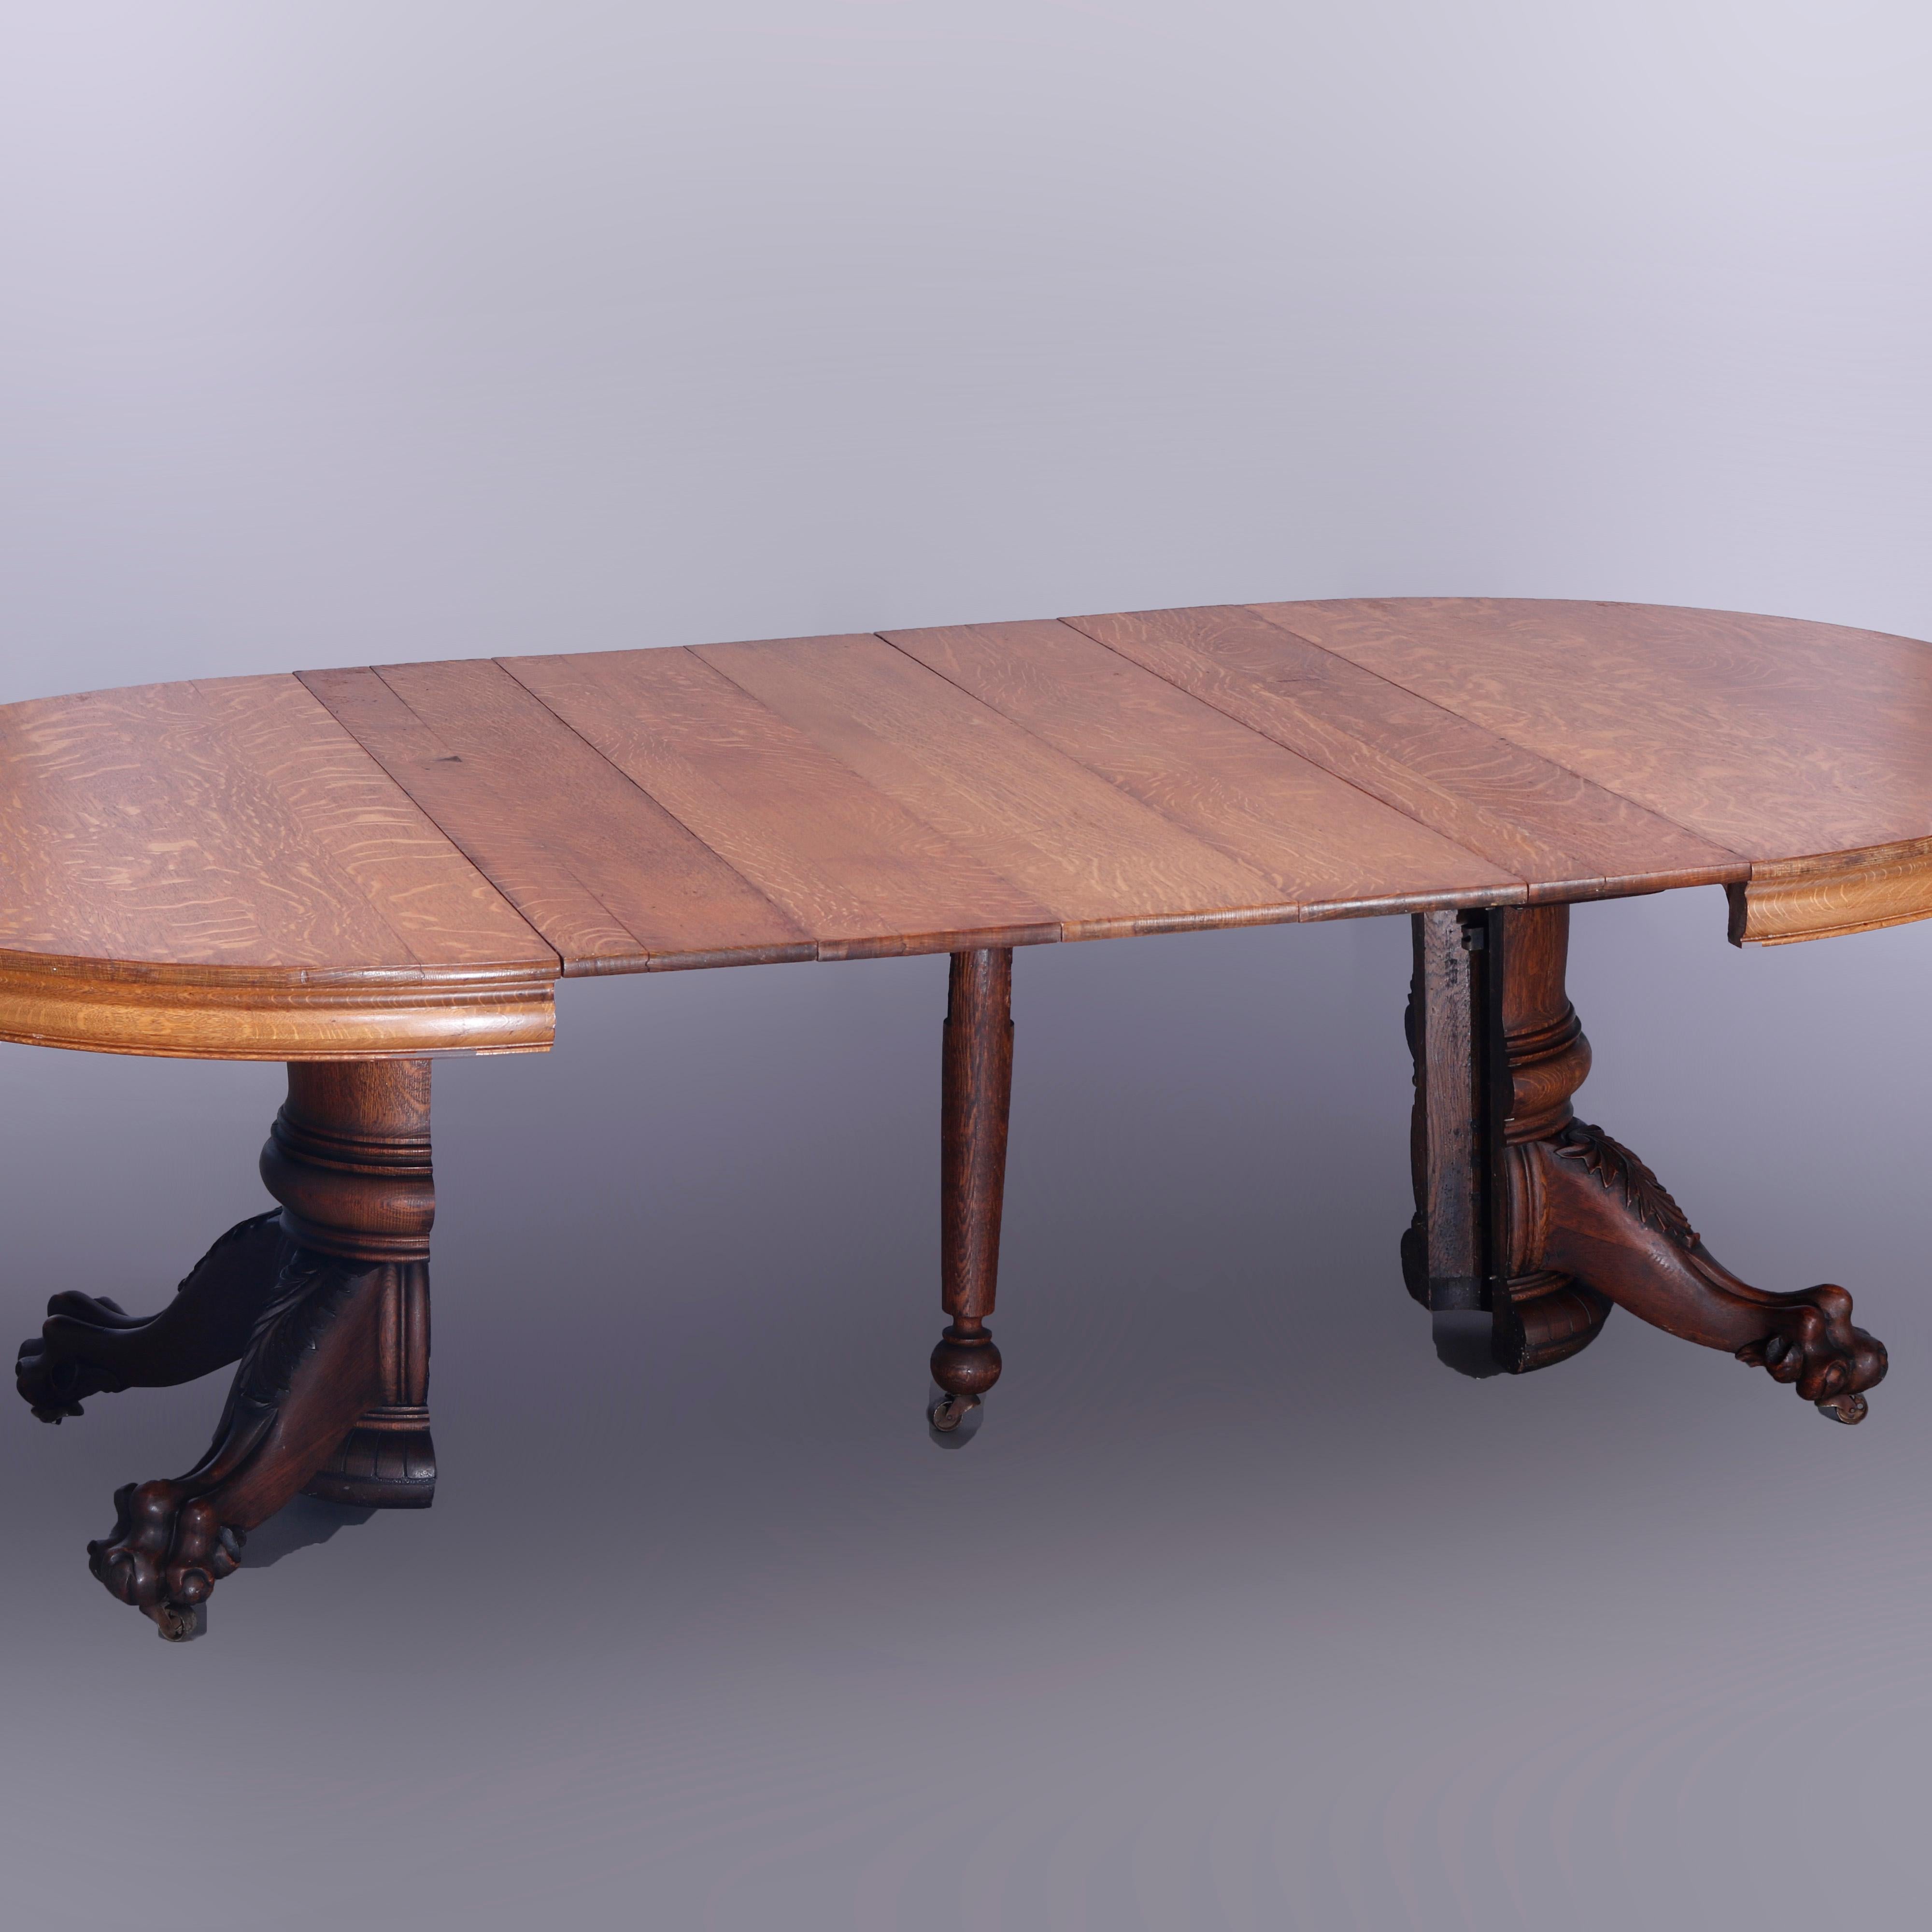 20th Century AntiqueHastings Round Oak Carved Claw Foot Banquet Dining Table & 5 Leaves c1910